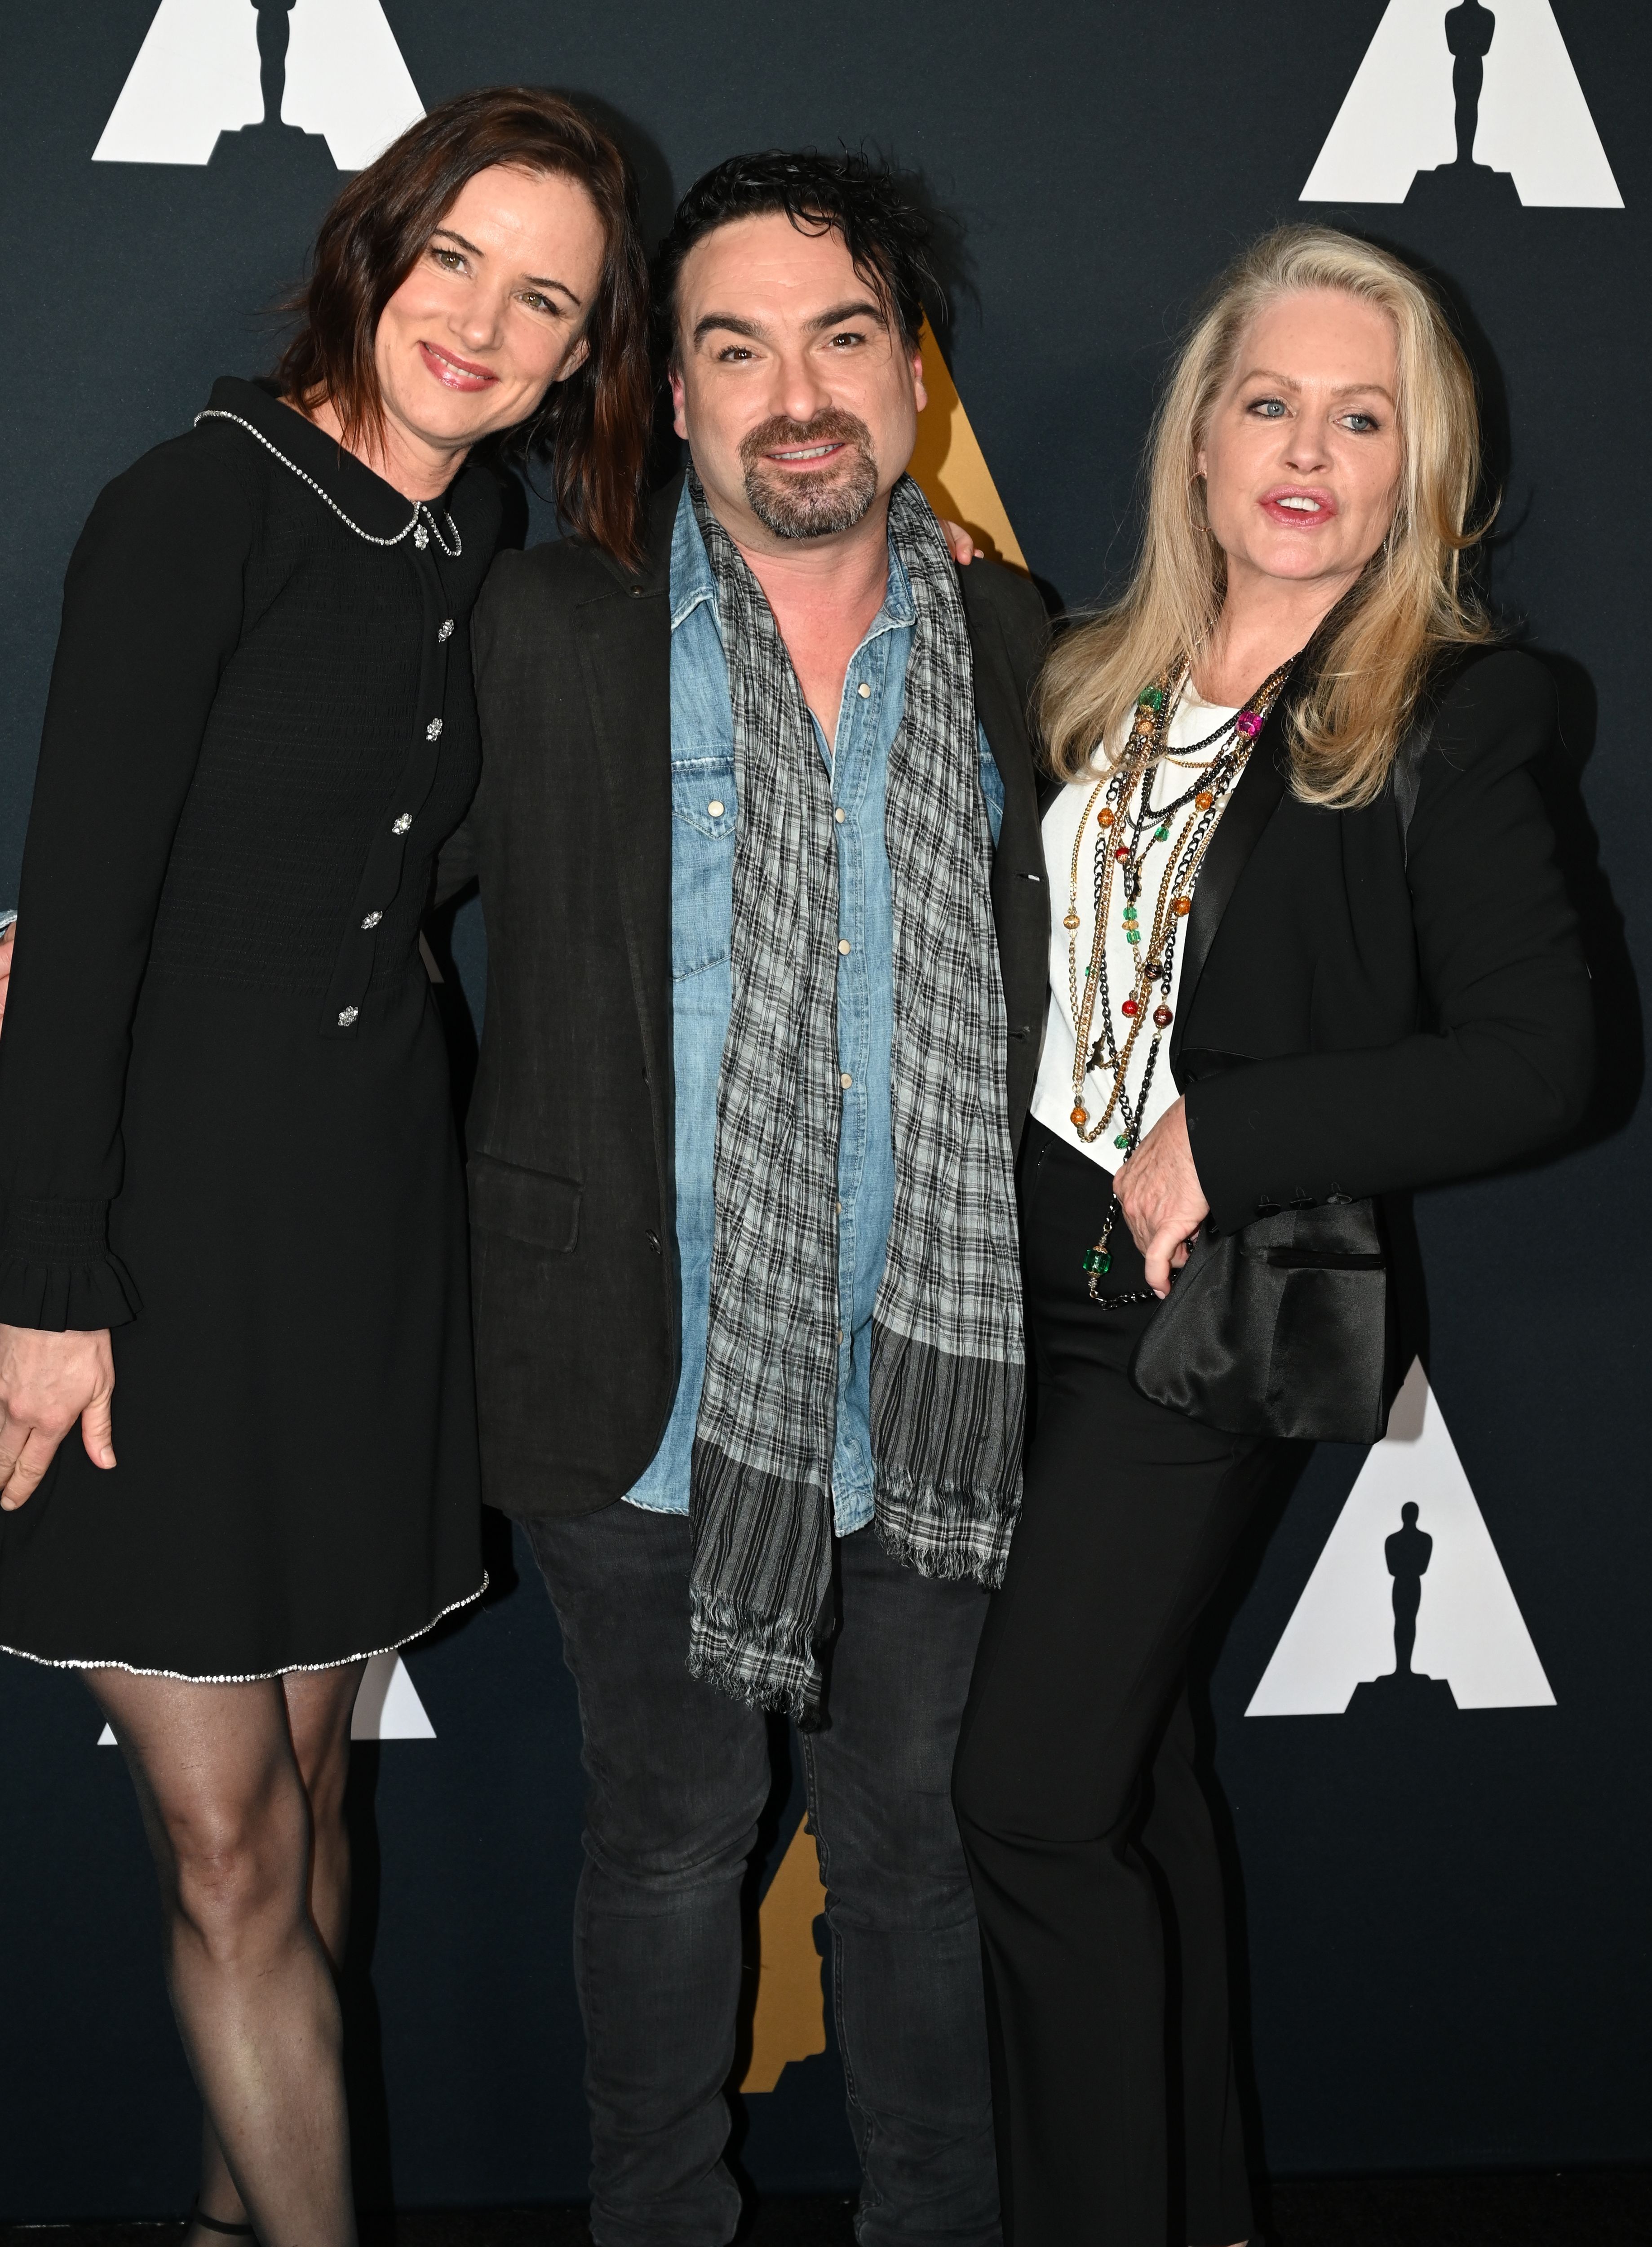 Juliette Lewis, Johnny Galecki, and Beverly D'Angelo attend the Academy of Motion Picture Arts and Sciences 30th-anniversary screening of "National Lampoons Christmas Vacation" in Beverly Hills on December 12, 2019. | Source: Getty Images